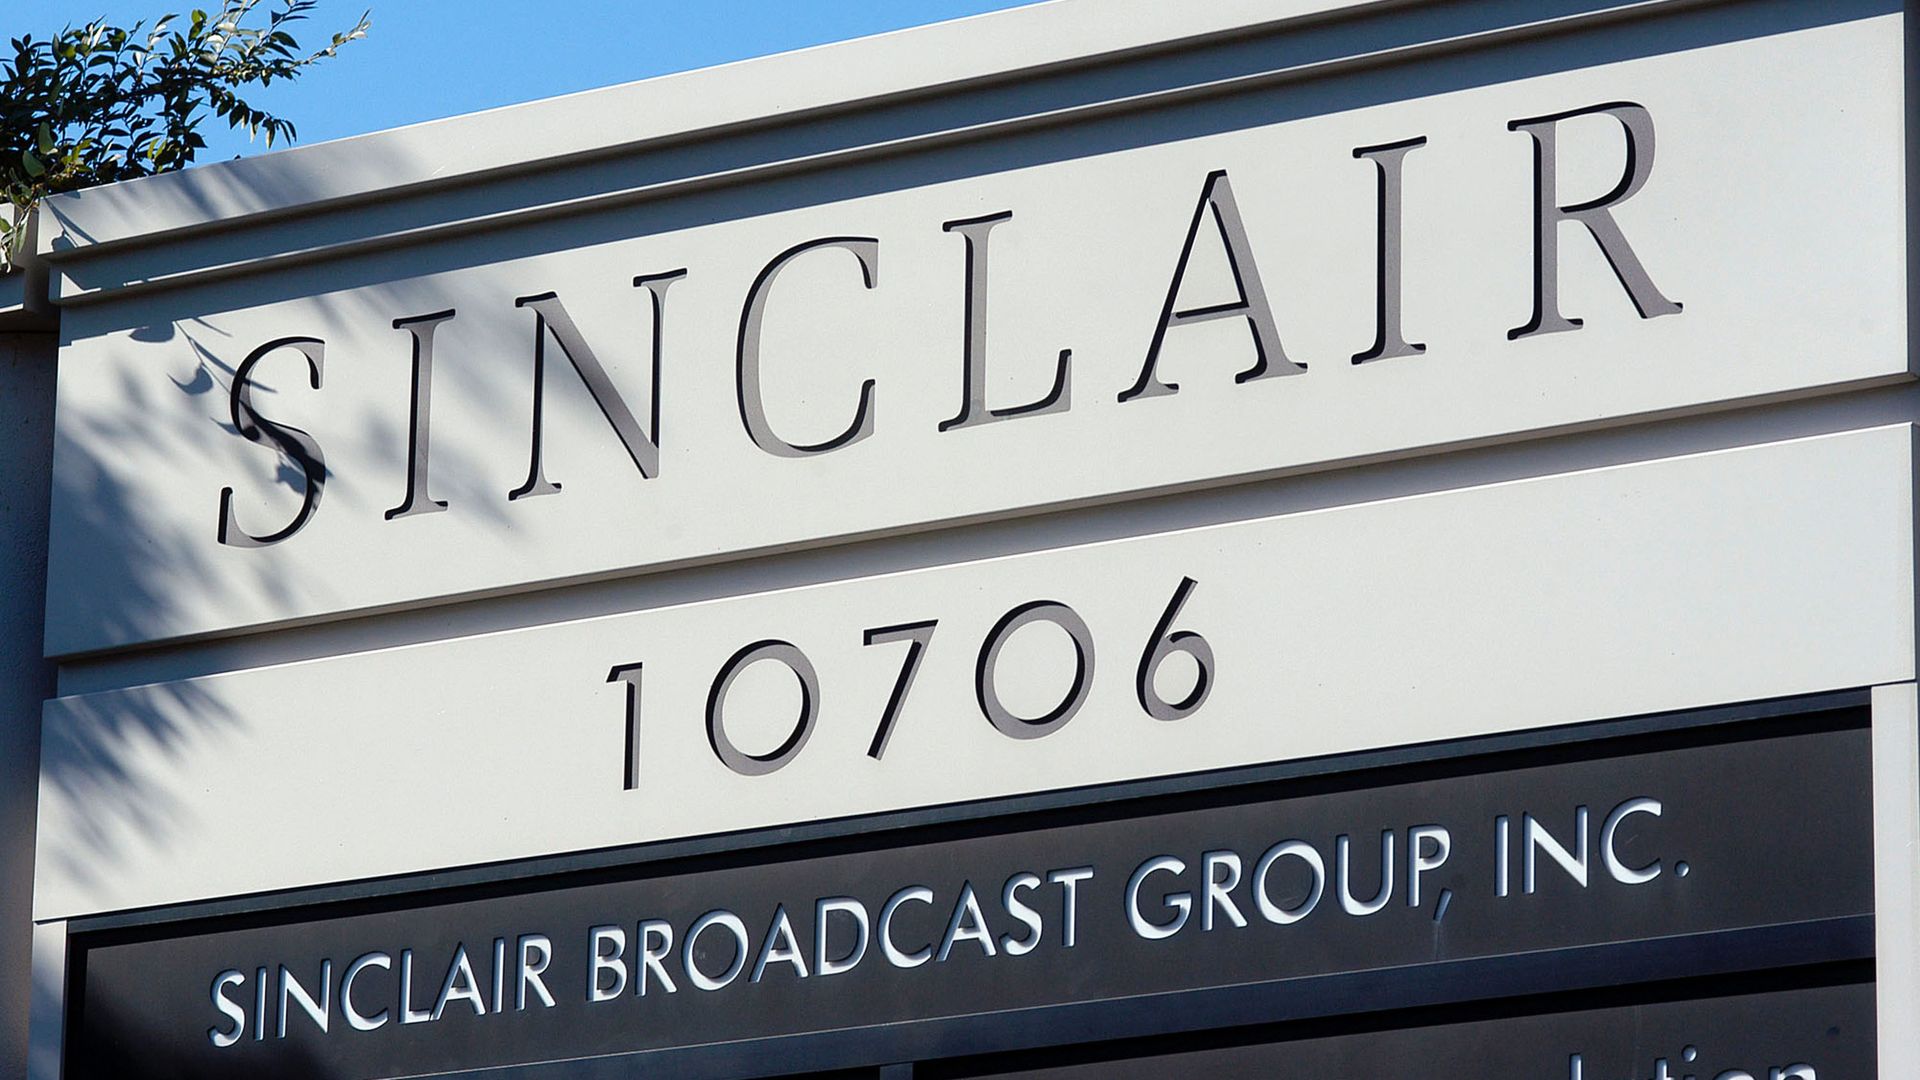 Sinclair broadcast group sign.